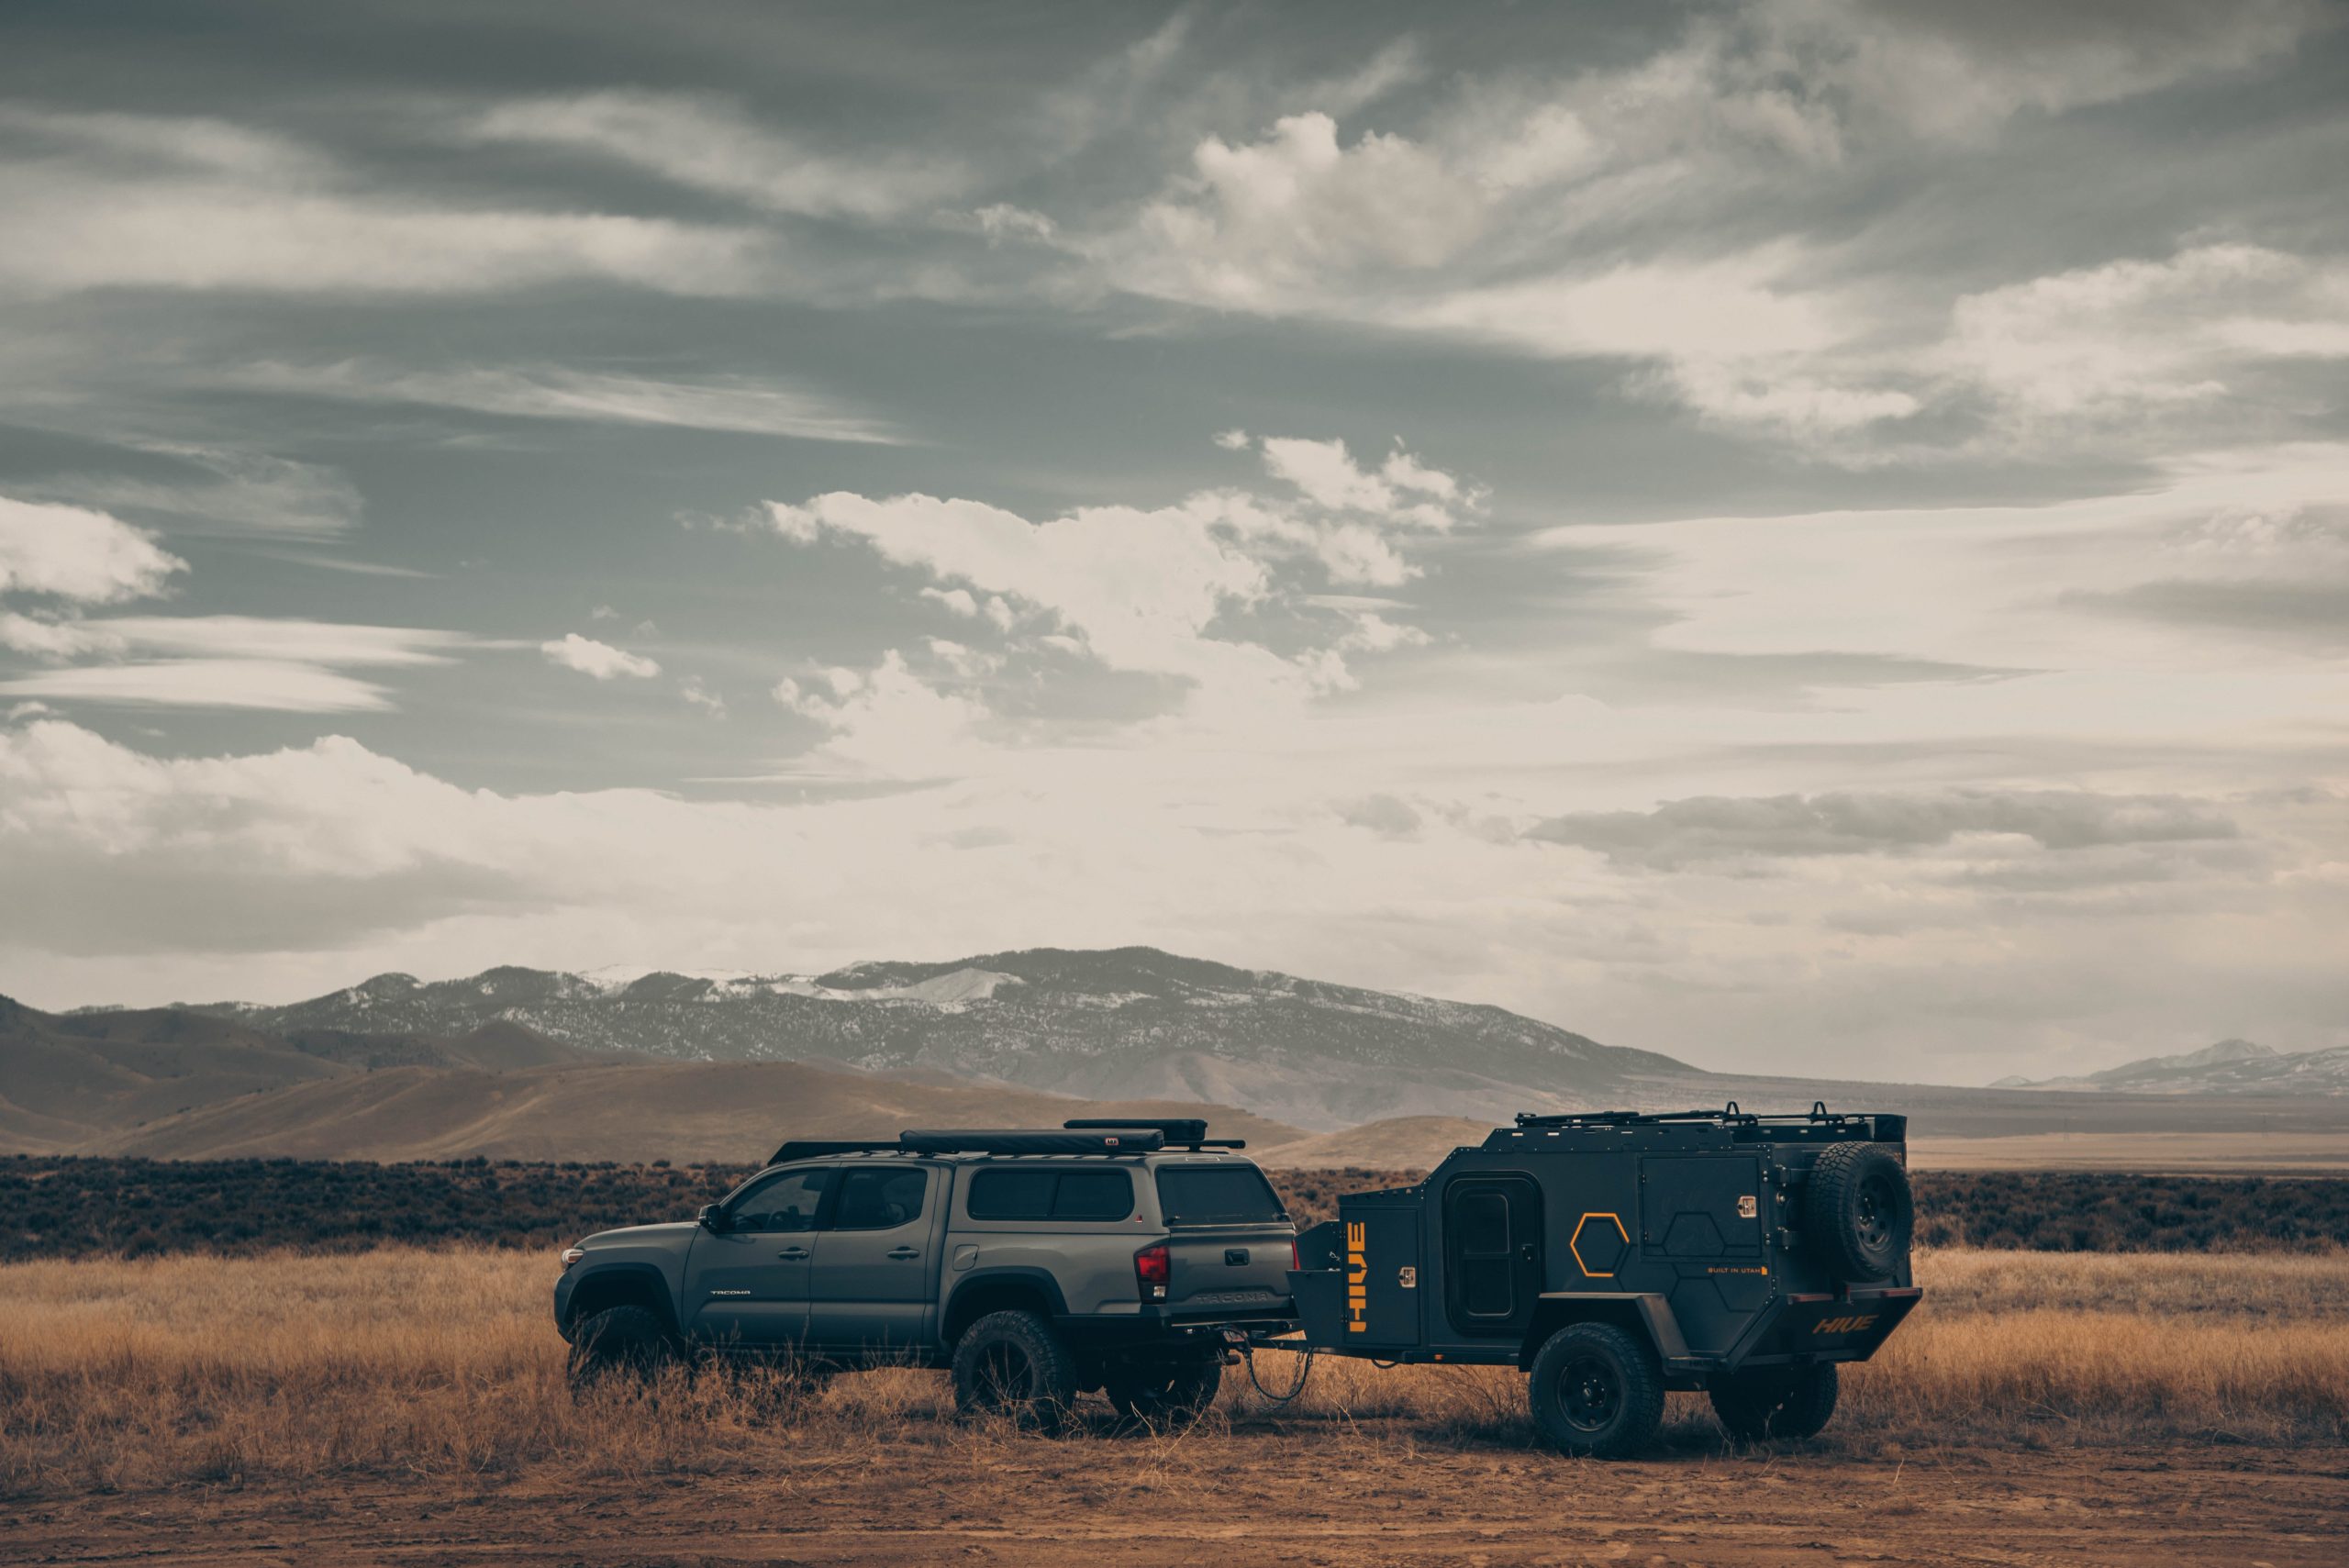 A truck with a covered back and a trailer hitch drives across dry, grassy plains with mountains in the distance.